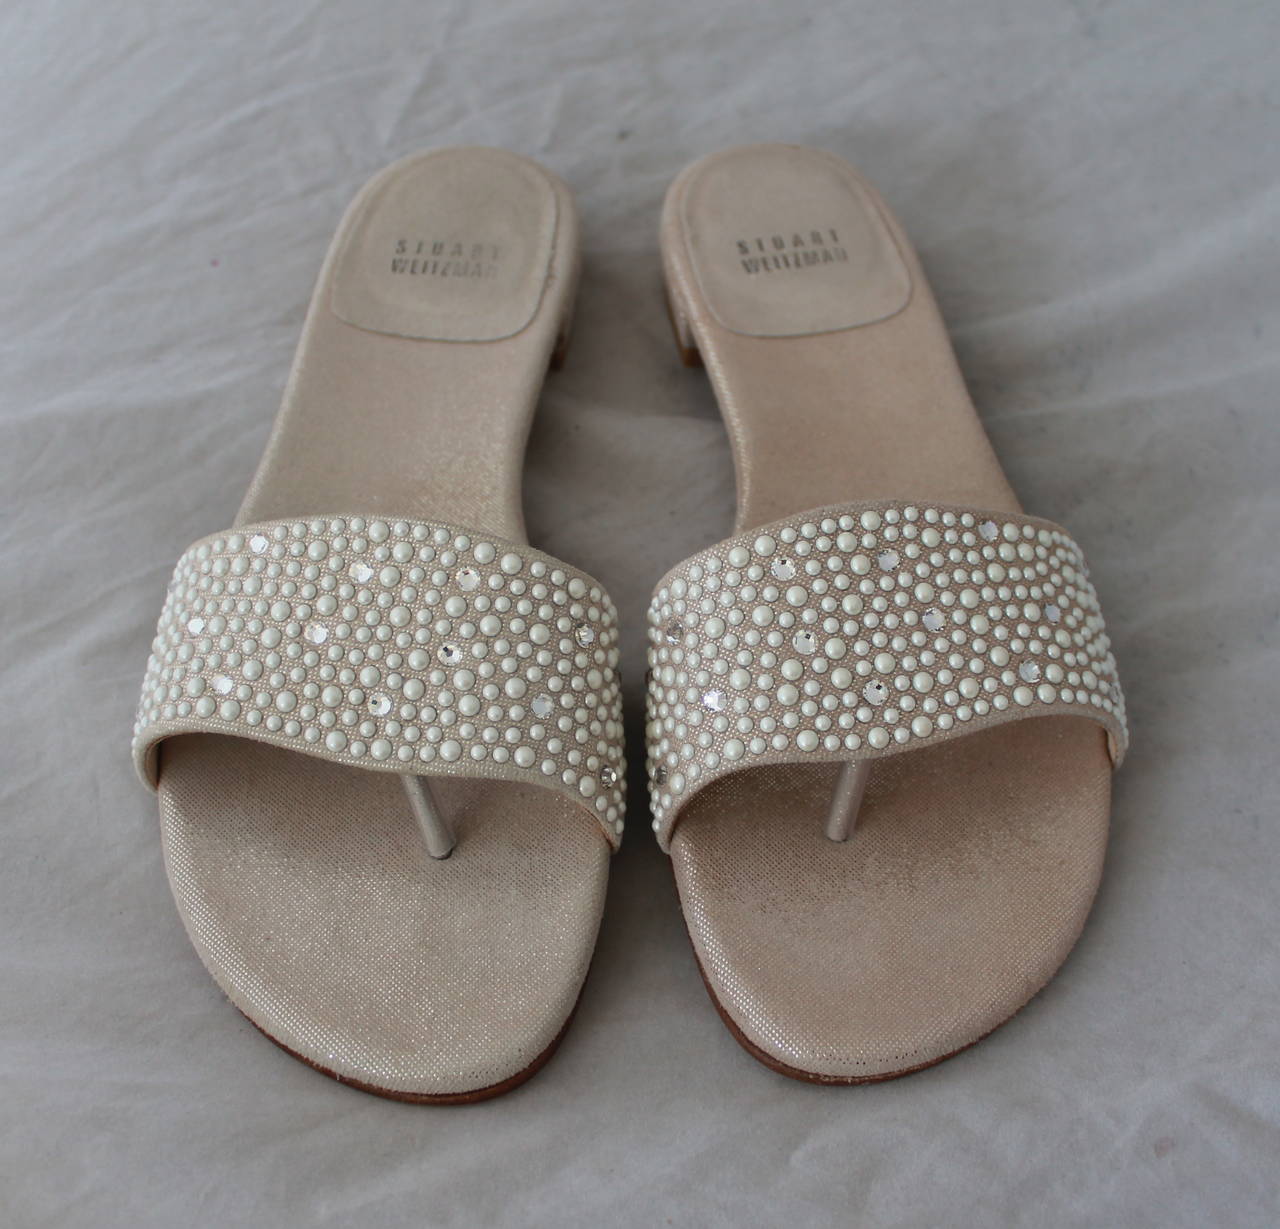 Stuart Weitzman Creme Fabric Sandals with Pearl & Rhinestone Detail - 7. These shoes are in excellent condition with barely any wear, some on the bottom.